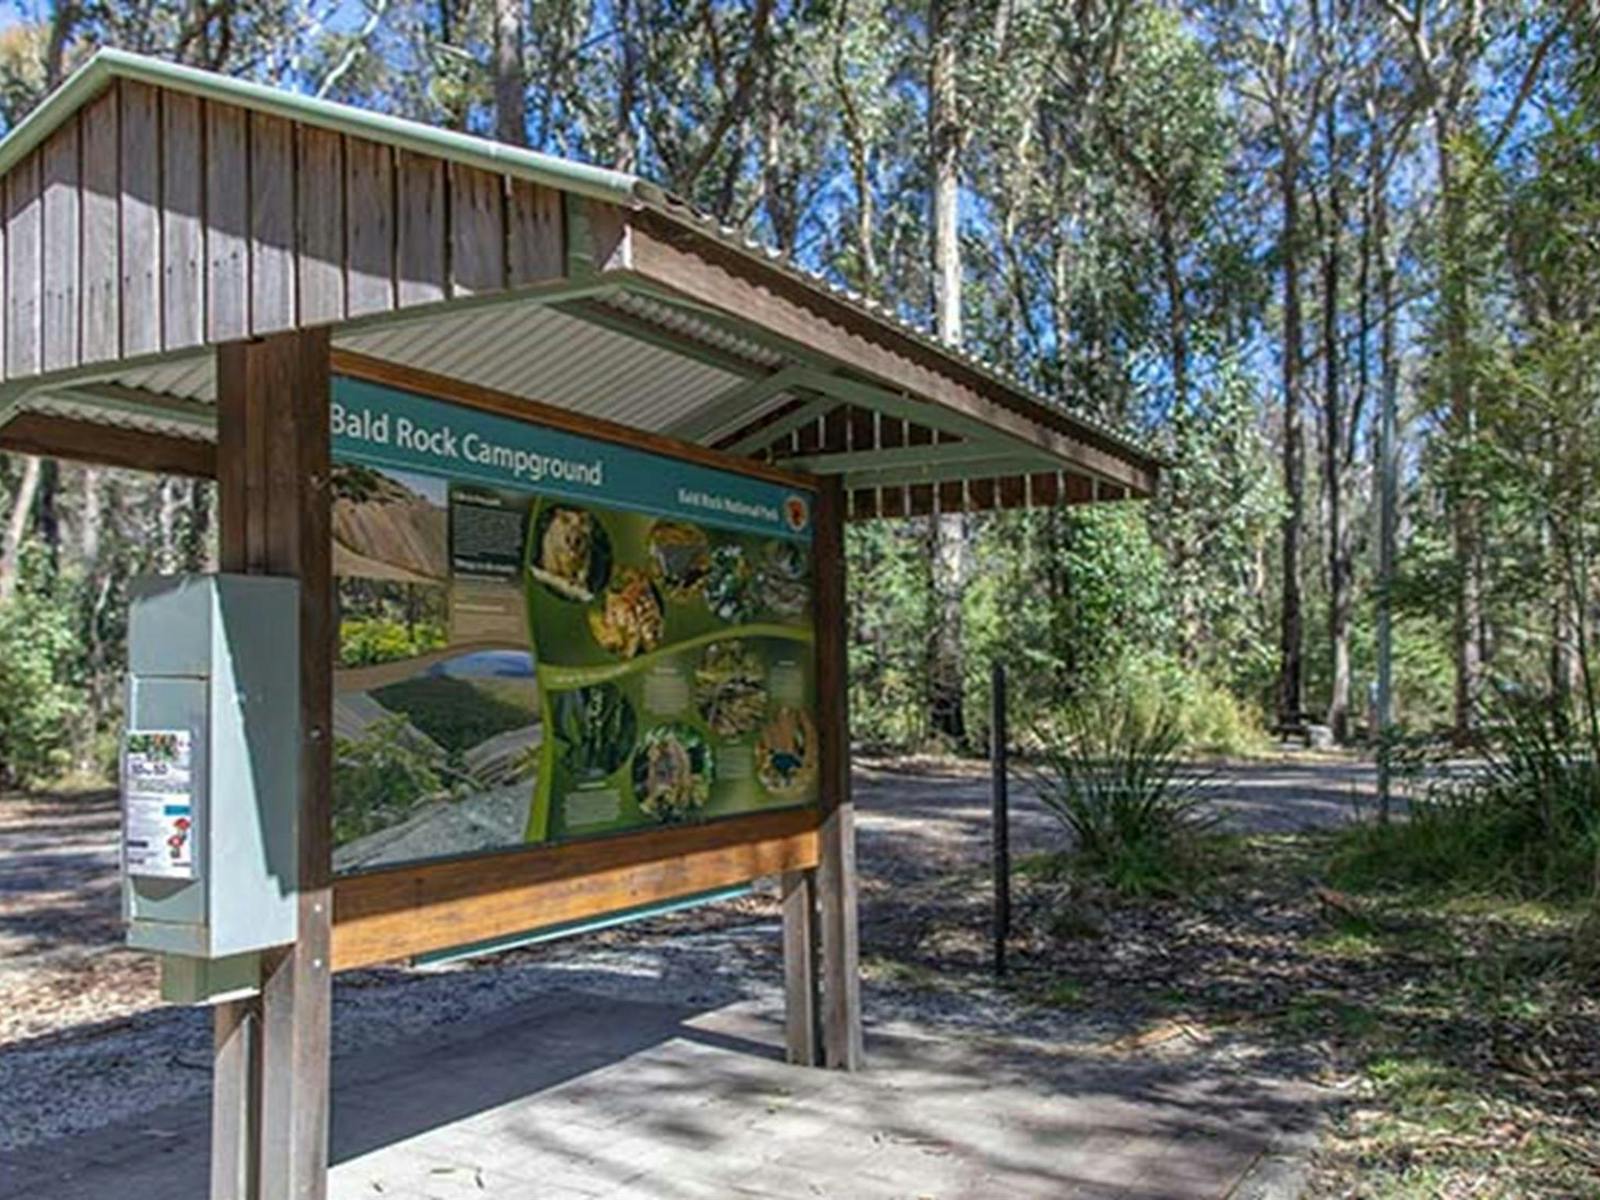 Information shelter at Bald Rock campground and picnic area, Bald Rock National Park. Photo: Joshua